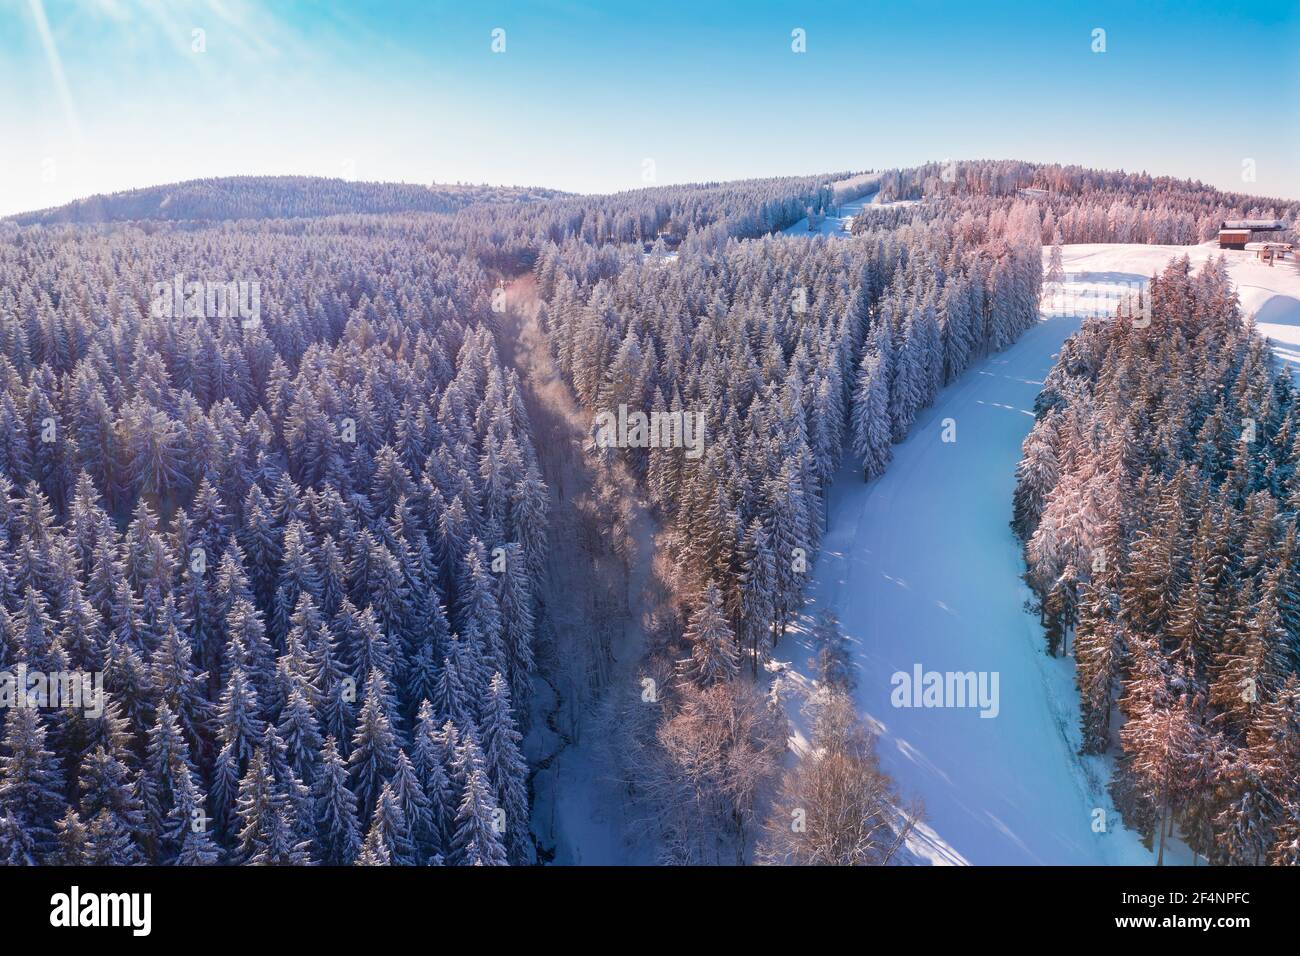 Air view shows forest of snow covered spruces. A ski slope crosses the winter forest. Beautiful winter weather with sun and snow. Stock Photo